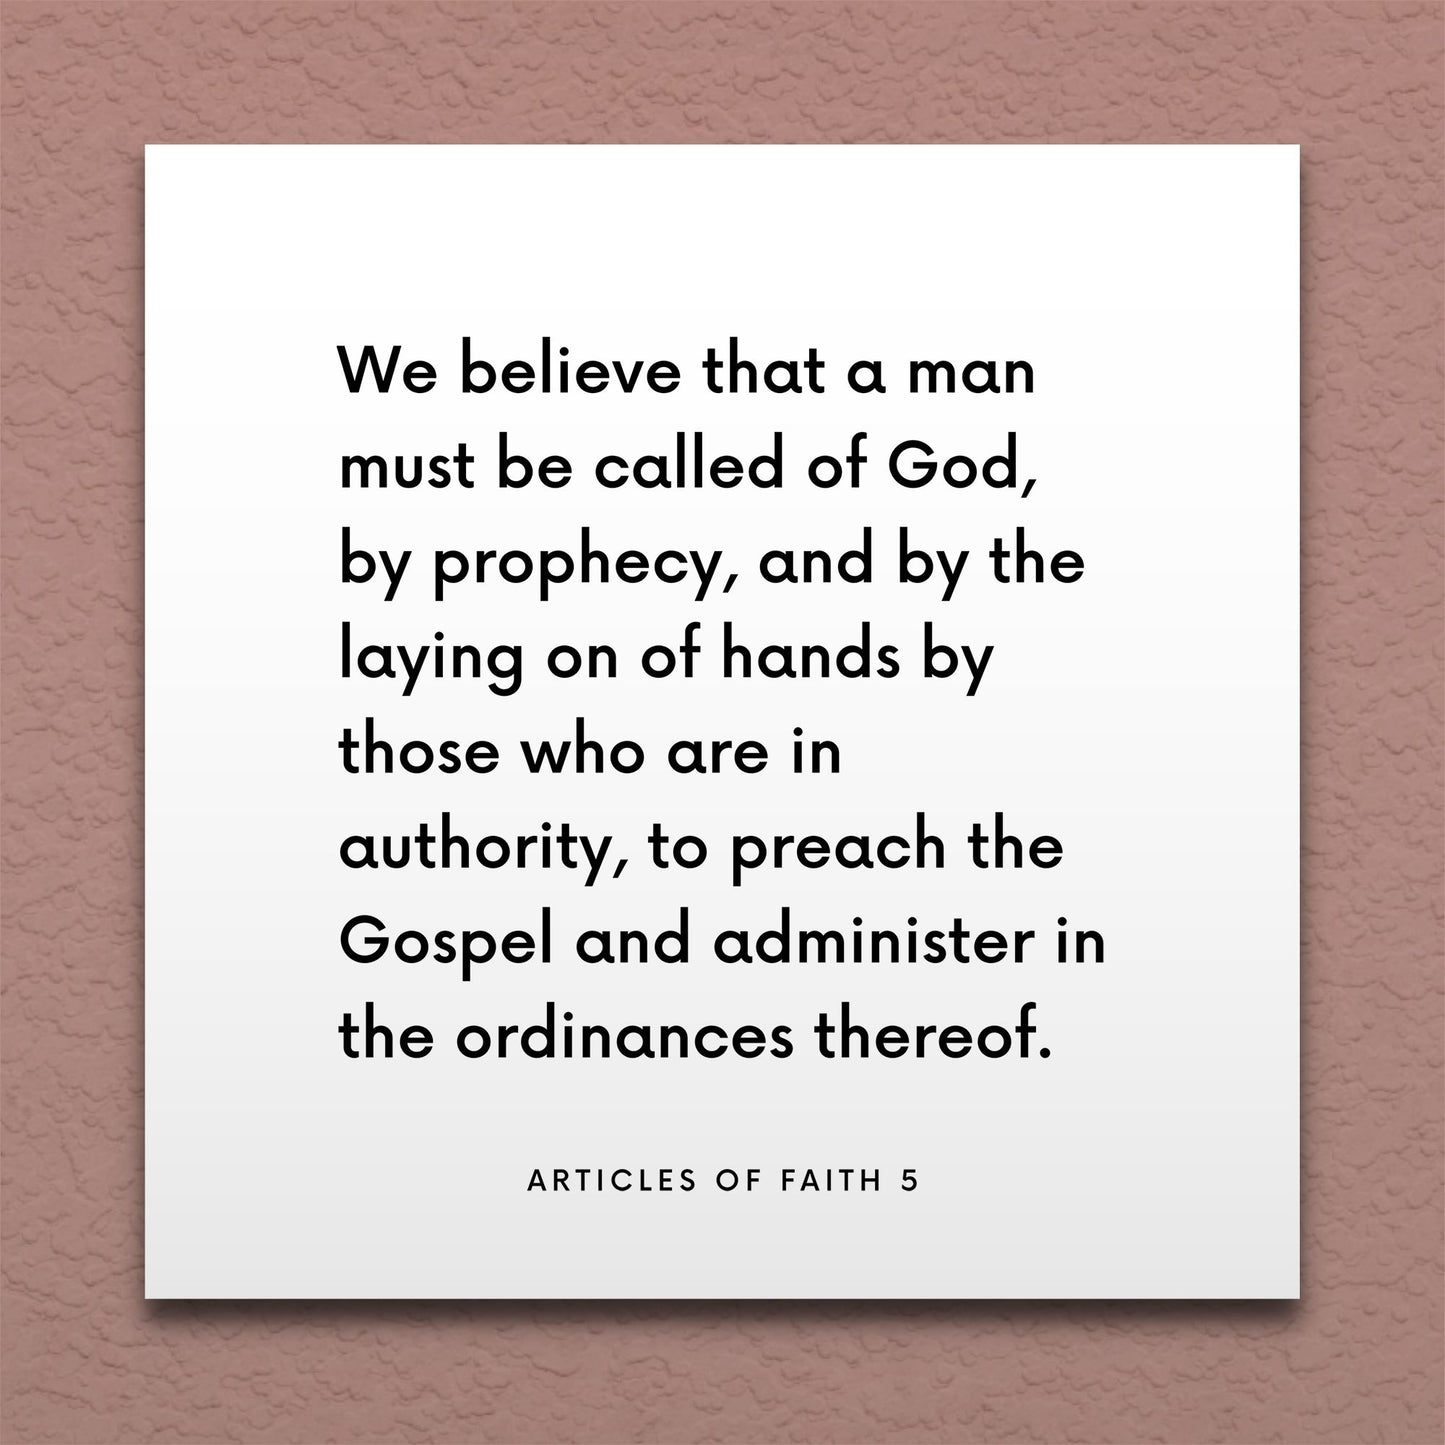 Wall-mounted scripture tile for Articles of Faith 5 - "We believe that a man must be called of God"